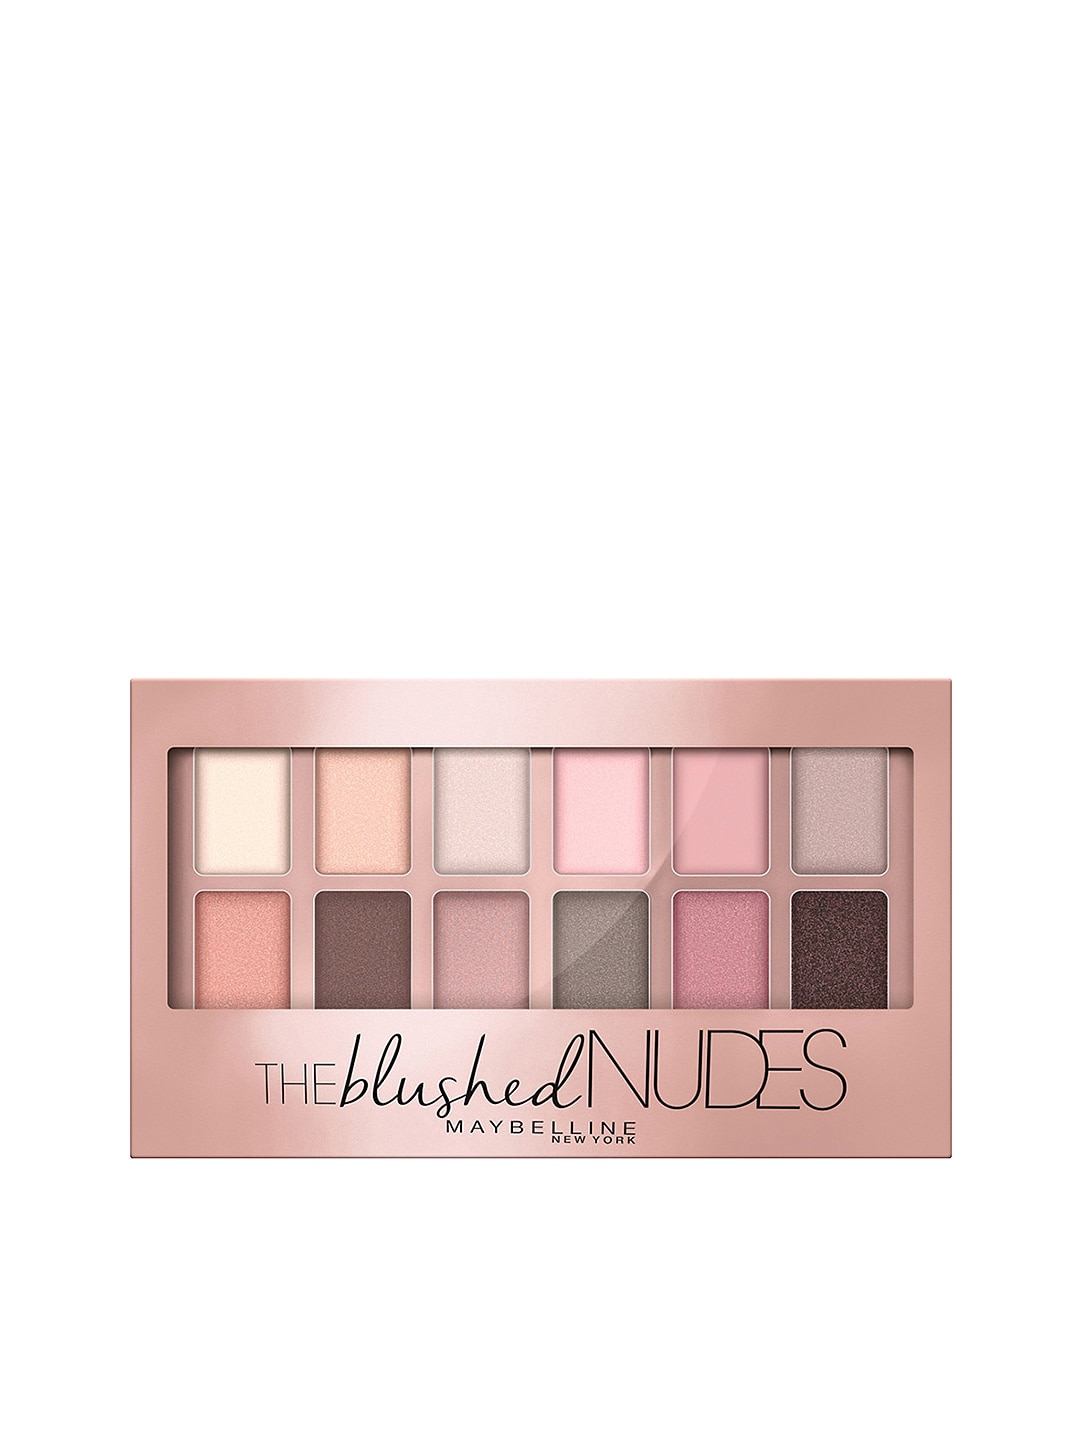 Maybelline New York The Nudes Eyeshadow Palette - Blush 9g Price in India